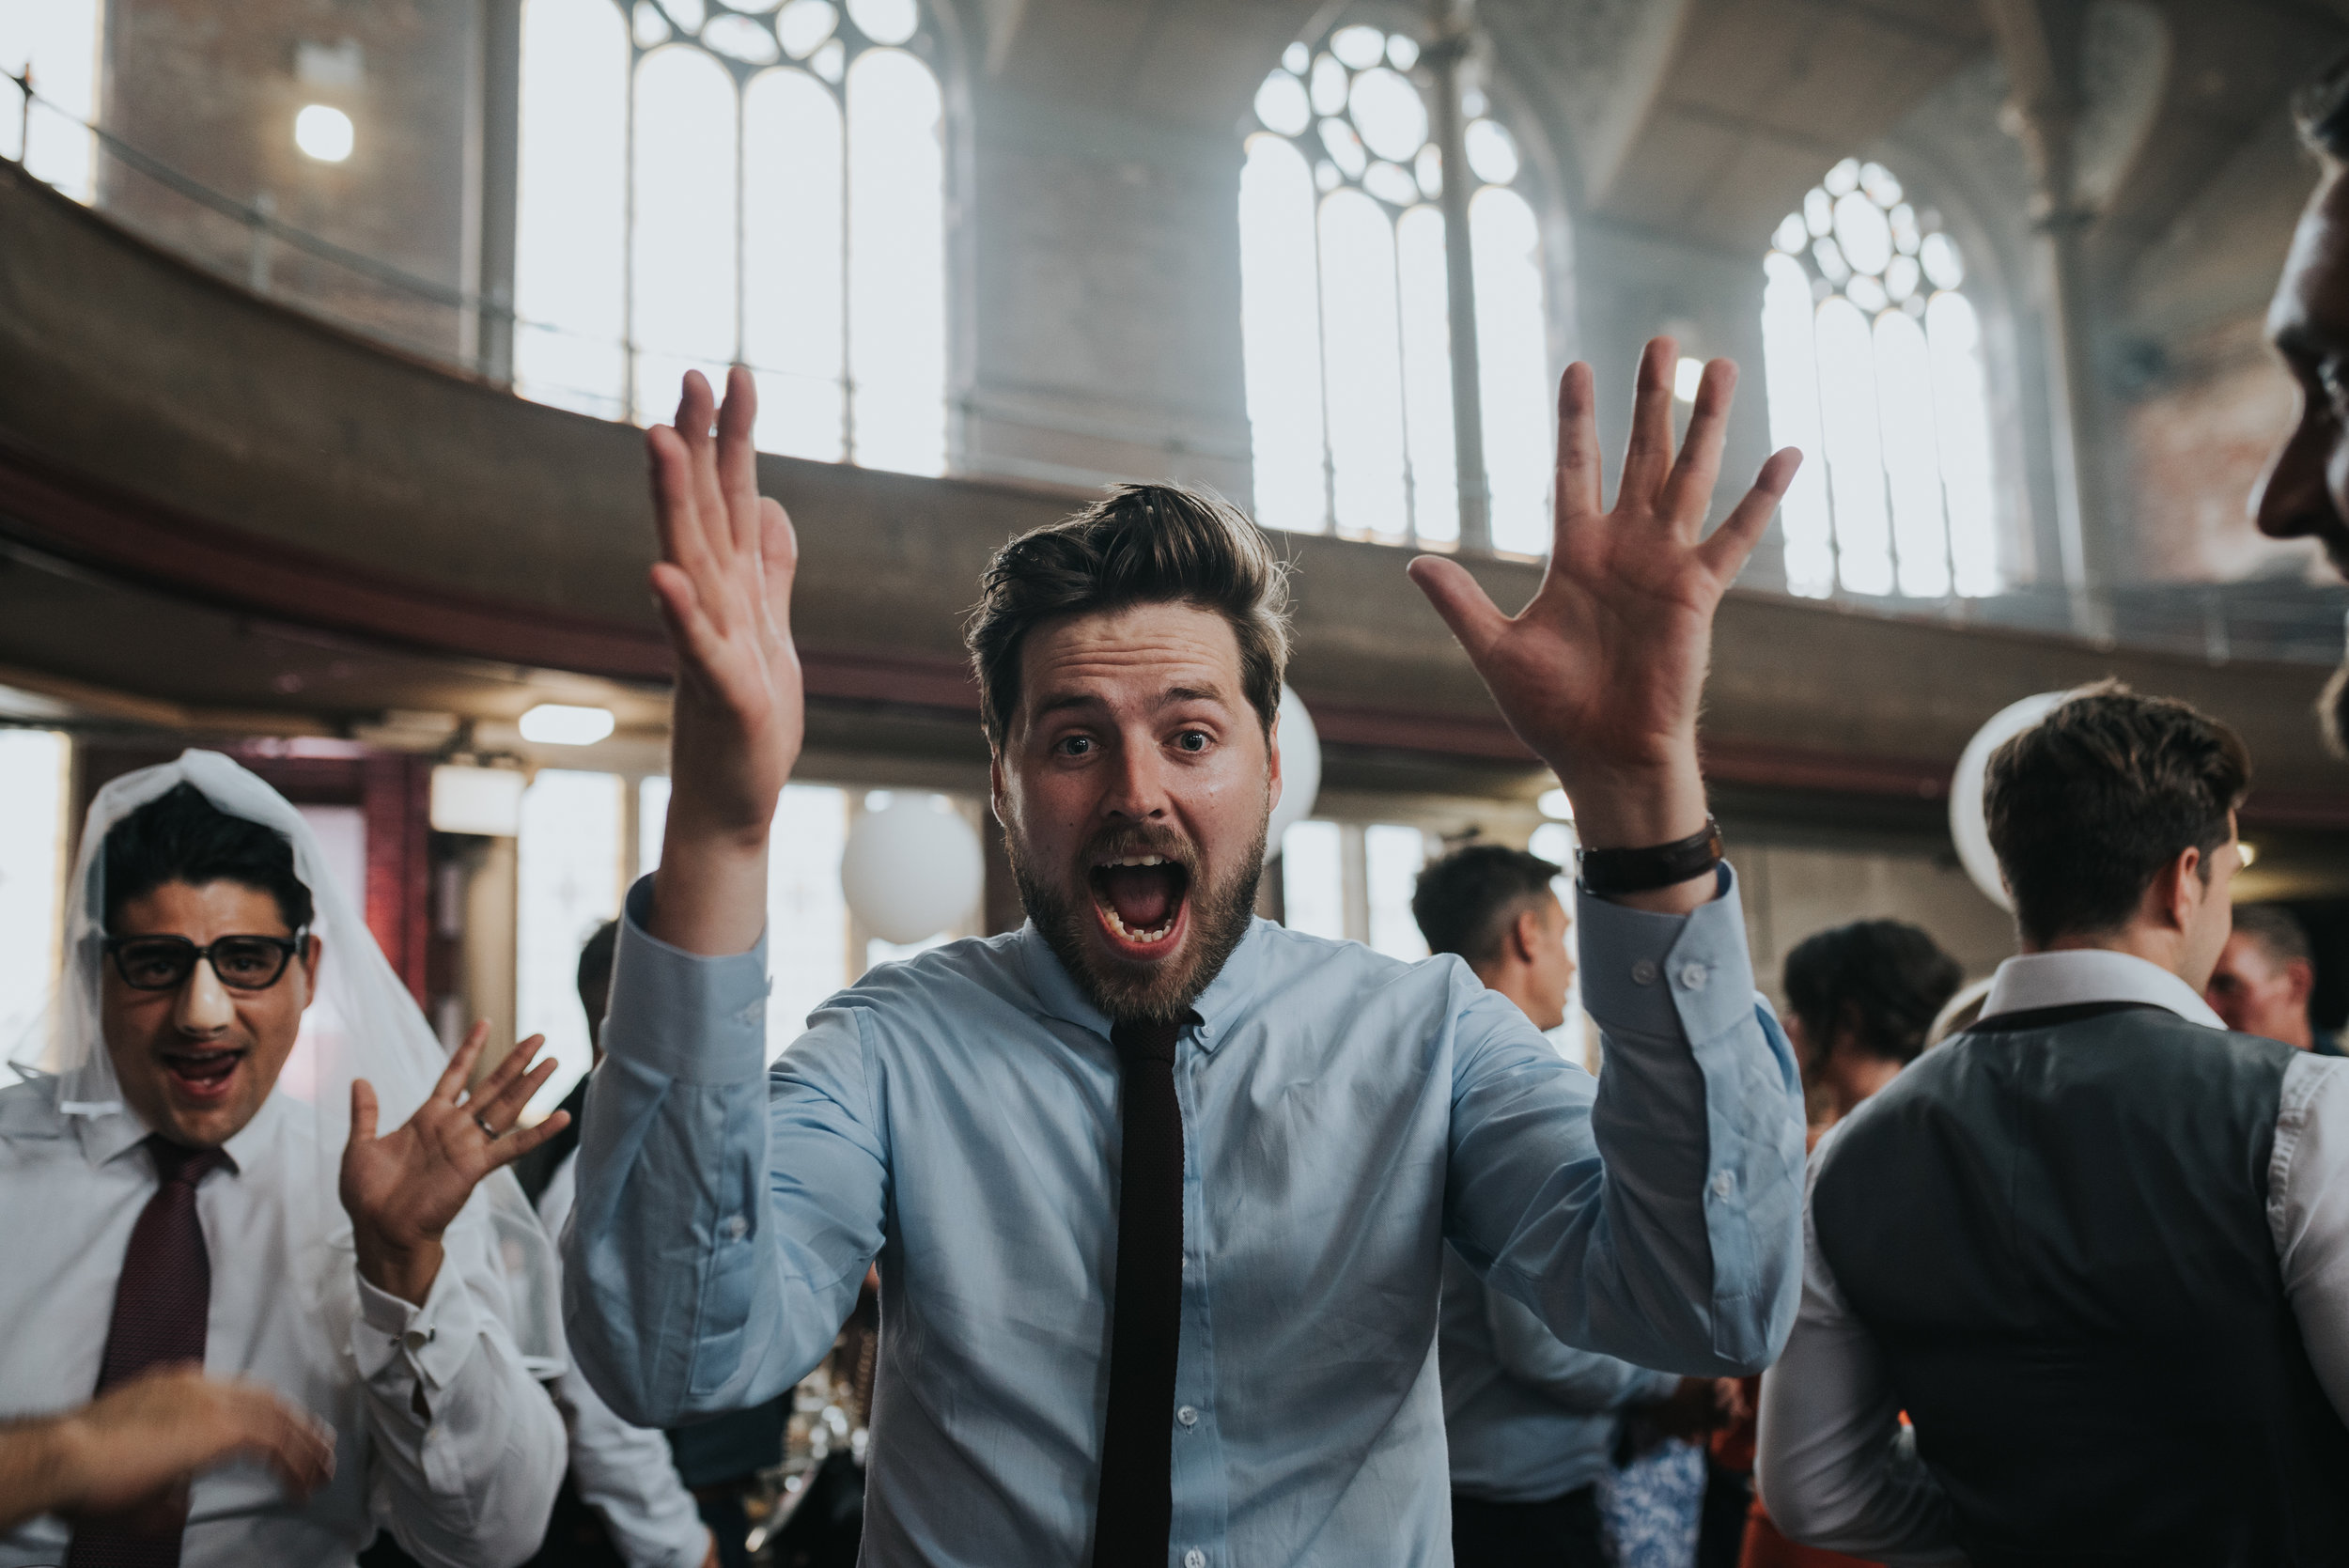 Wedding guest with shocked face and hands in the air. 